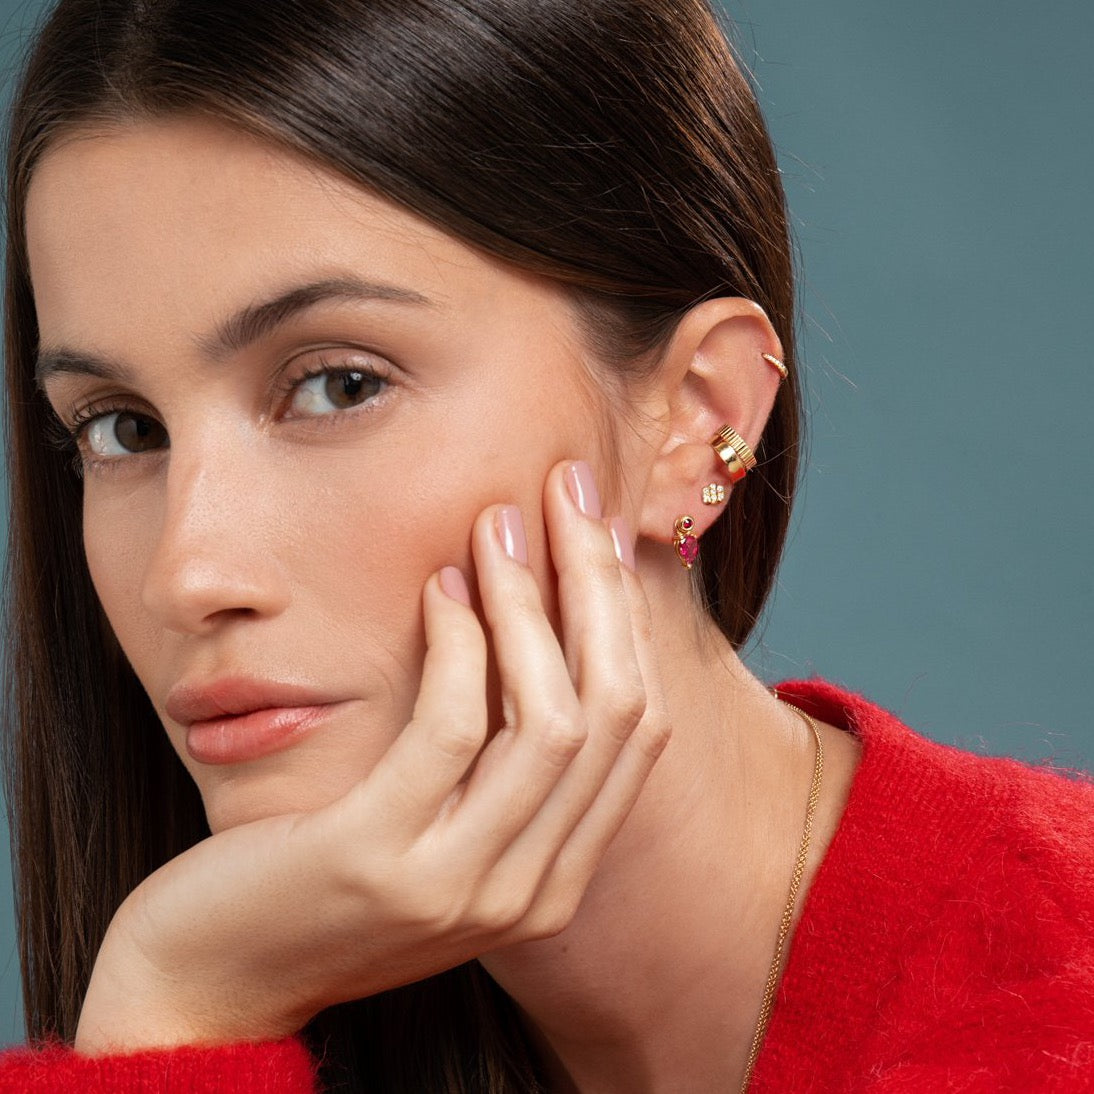 Lilian wearing the Yellow Gold Diamond Huggy Small, Carved Gold Ear Cuff, Gold Ear Cuff, the Triple Diamond Bar Studs and the Ruby Stud and Bright Pink Tourmaline Earring Pendant by McFarlane Fine Jewellery